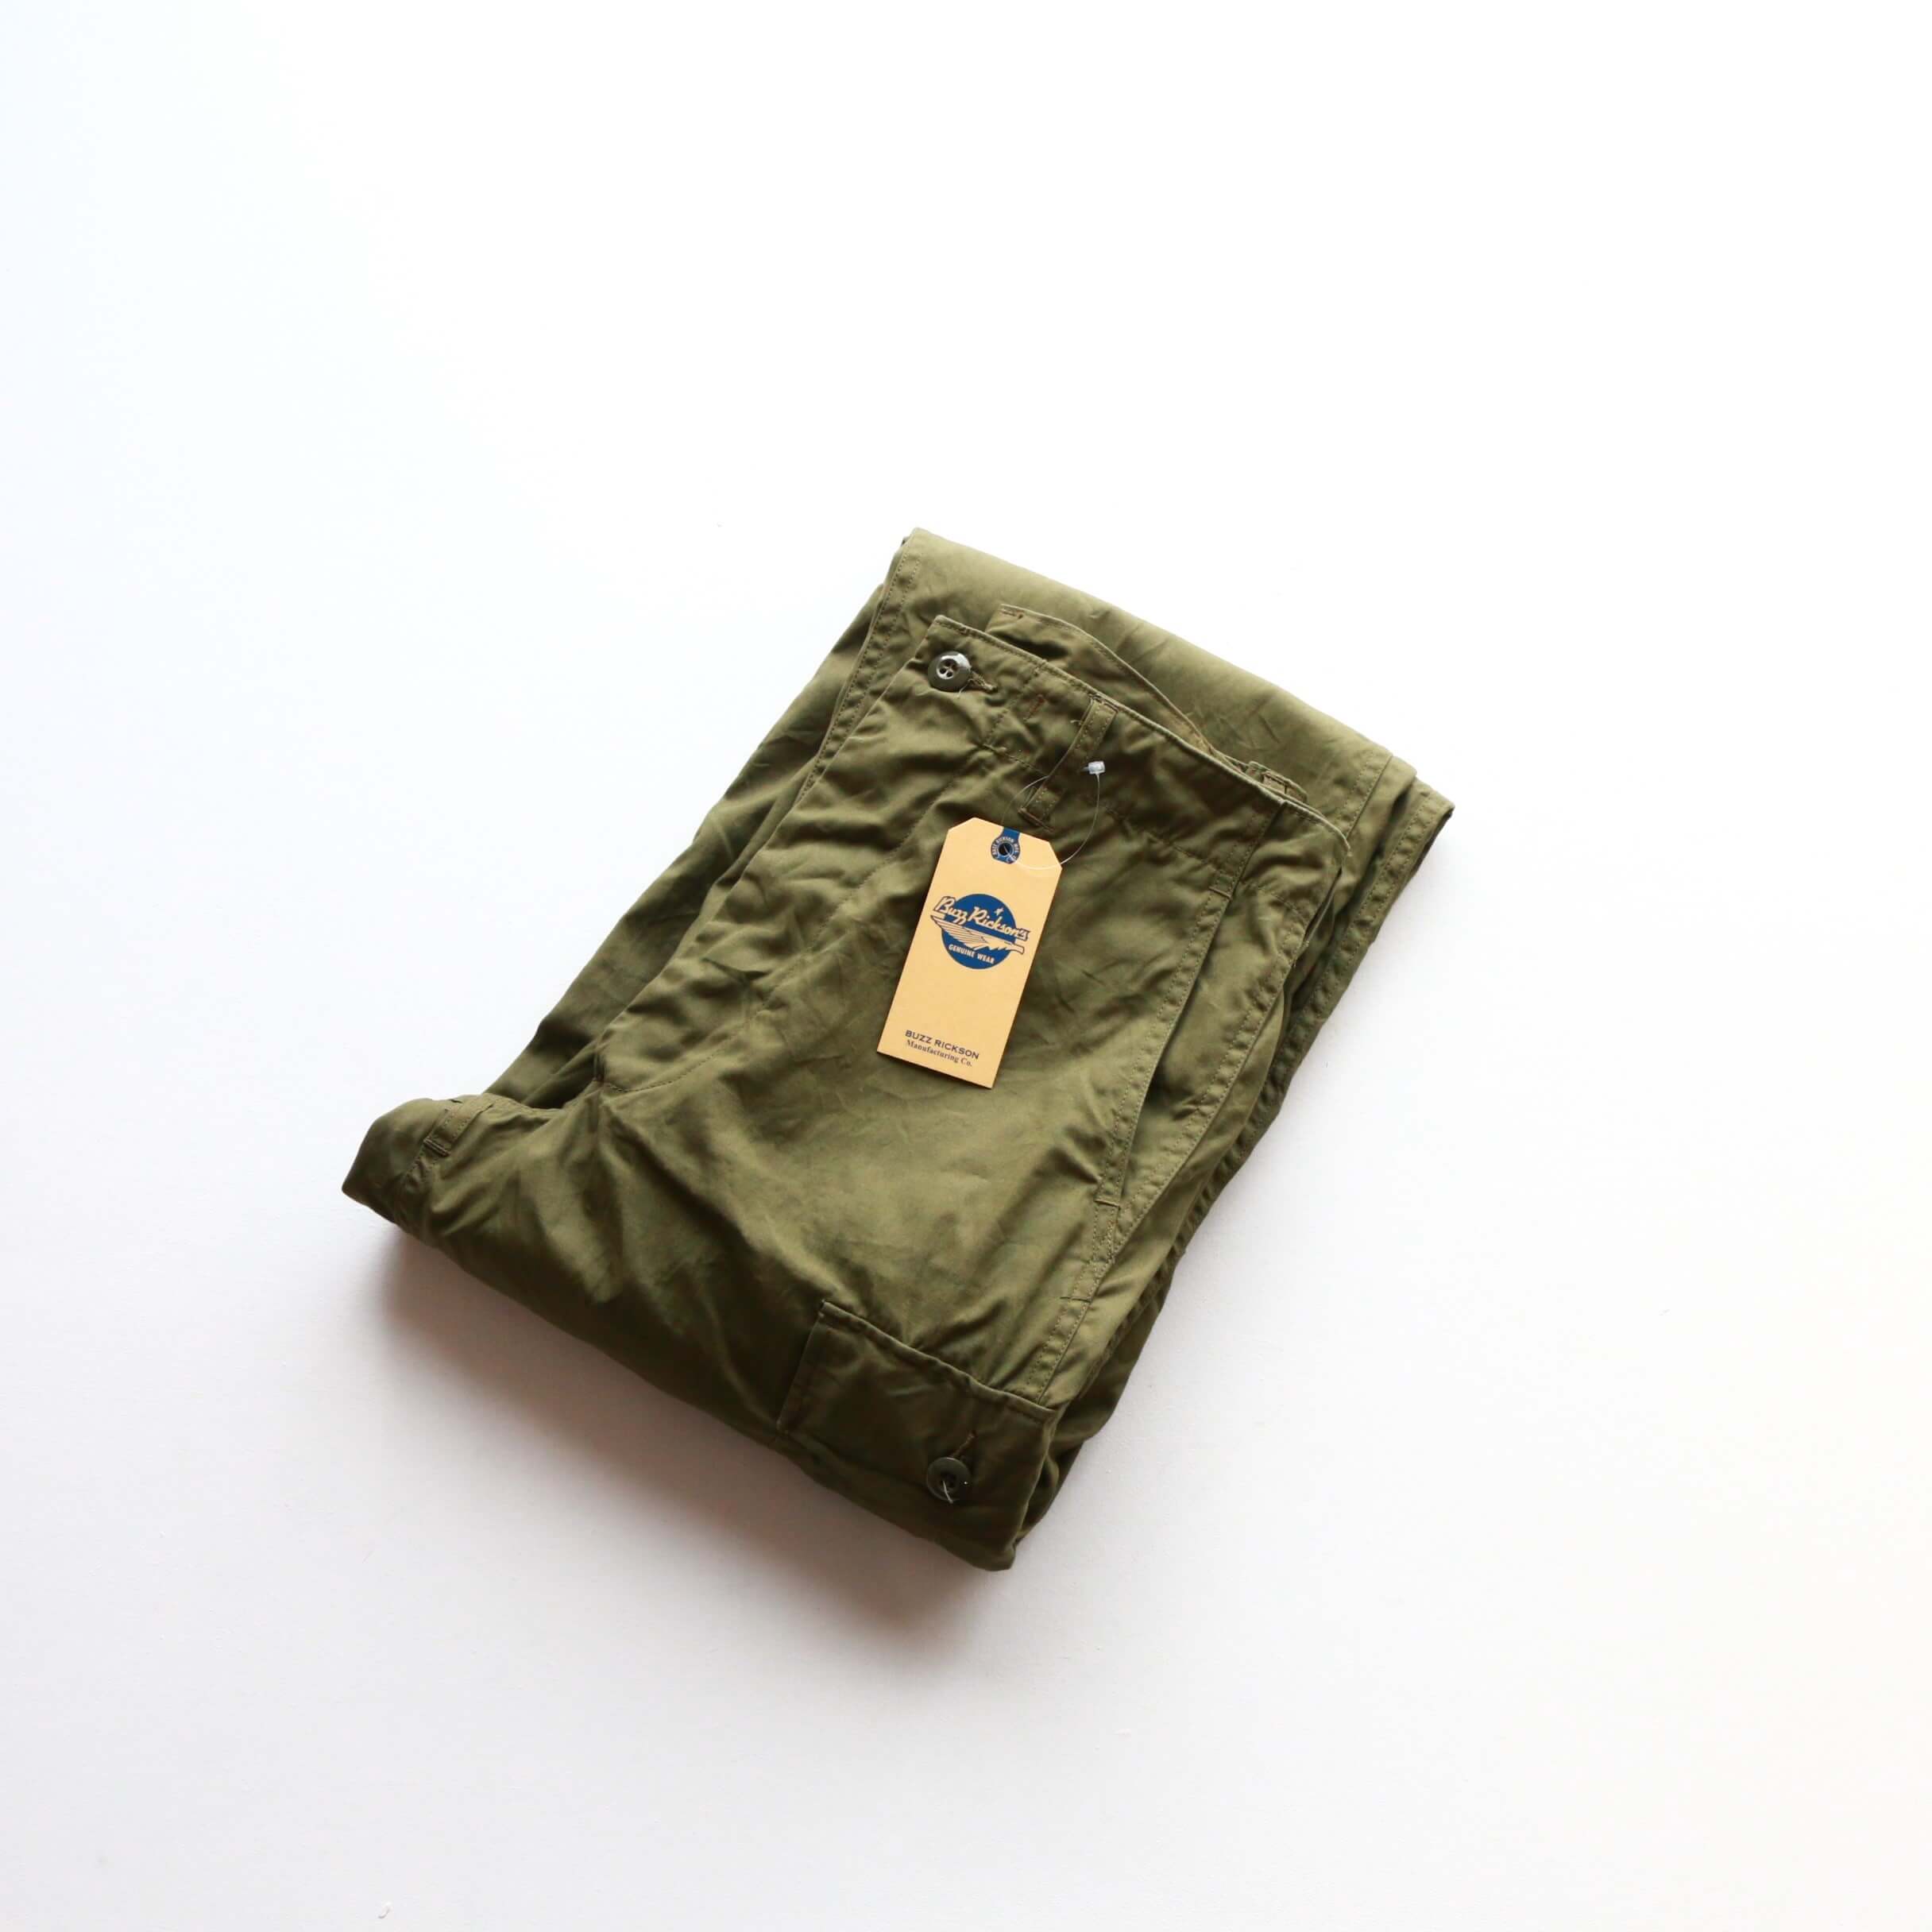 Buzz Rickson's バズリクソンズ TOROUSERS,MEN'S COTTON WIDE RESISTANT POPLIN OLIVE GREEN ARMY SHADE 107 ジャングルファティーグパンツ 初期型